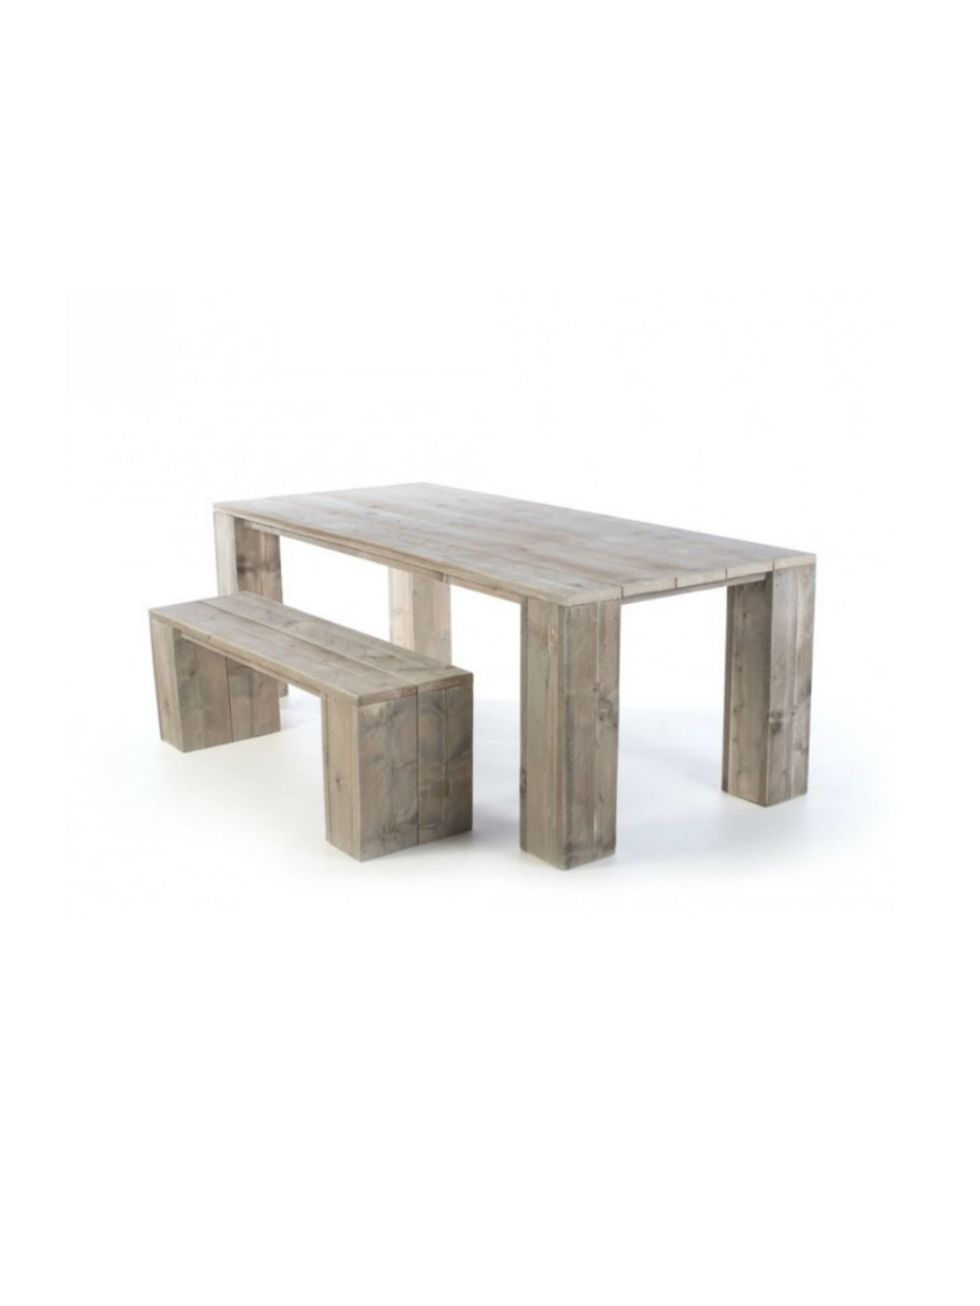 Wood, Table, Outdoor furniture, Rectangle, Grey, Hardwood, Coffee table, Beige, Composite material, Concrete, 